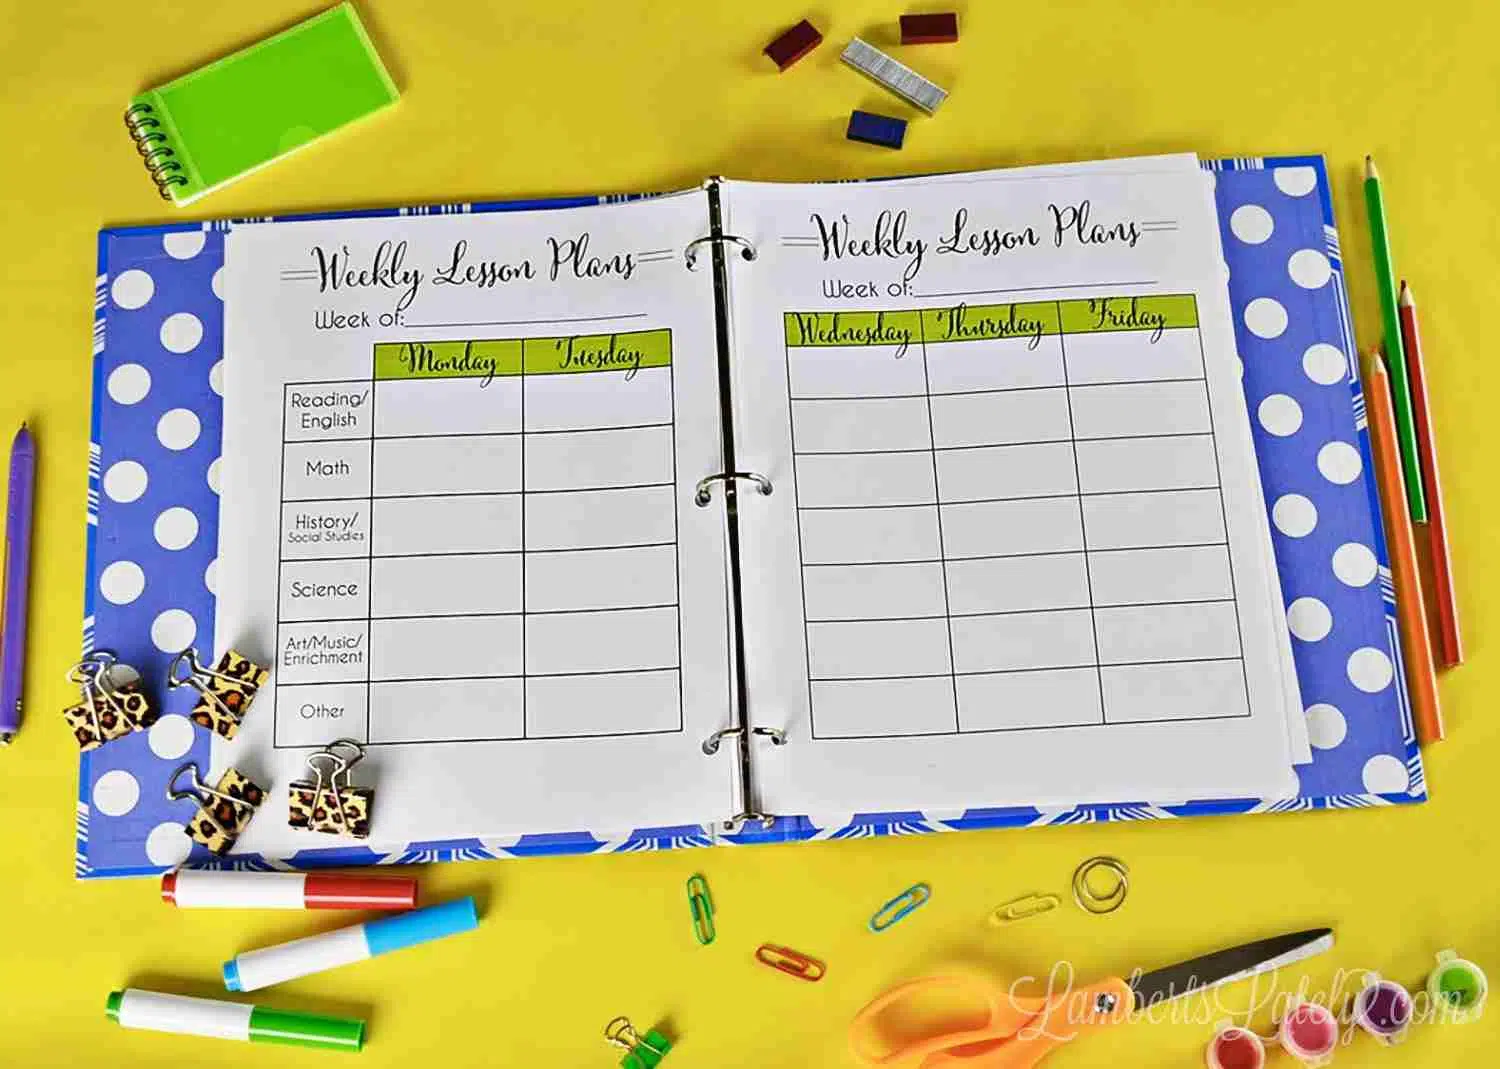 2 weekly lesson plan sheets in a notebook on a yellow desk.